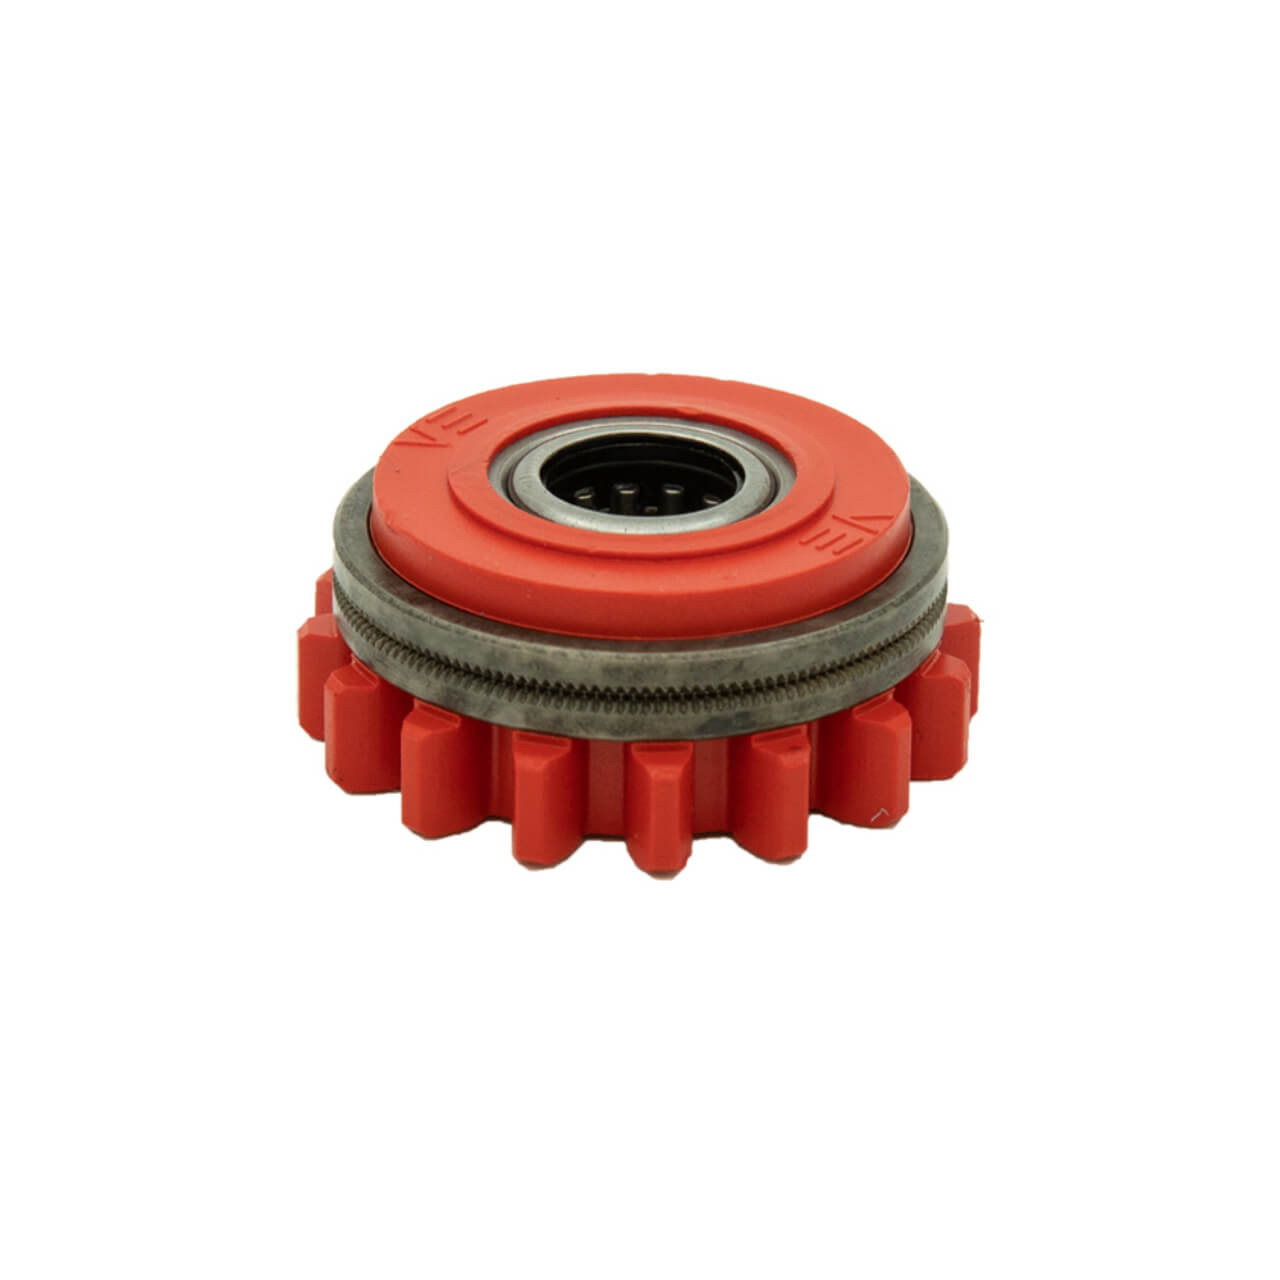 Kempact 1.0mm Knurled Upper Drive Roller Red